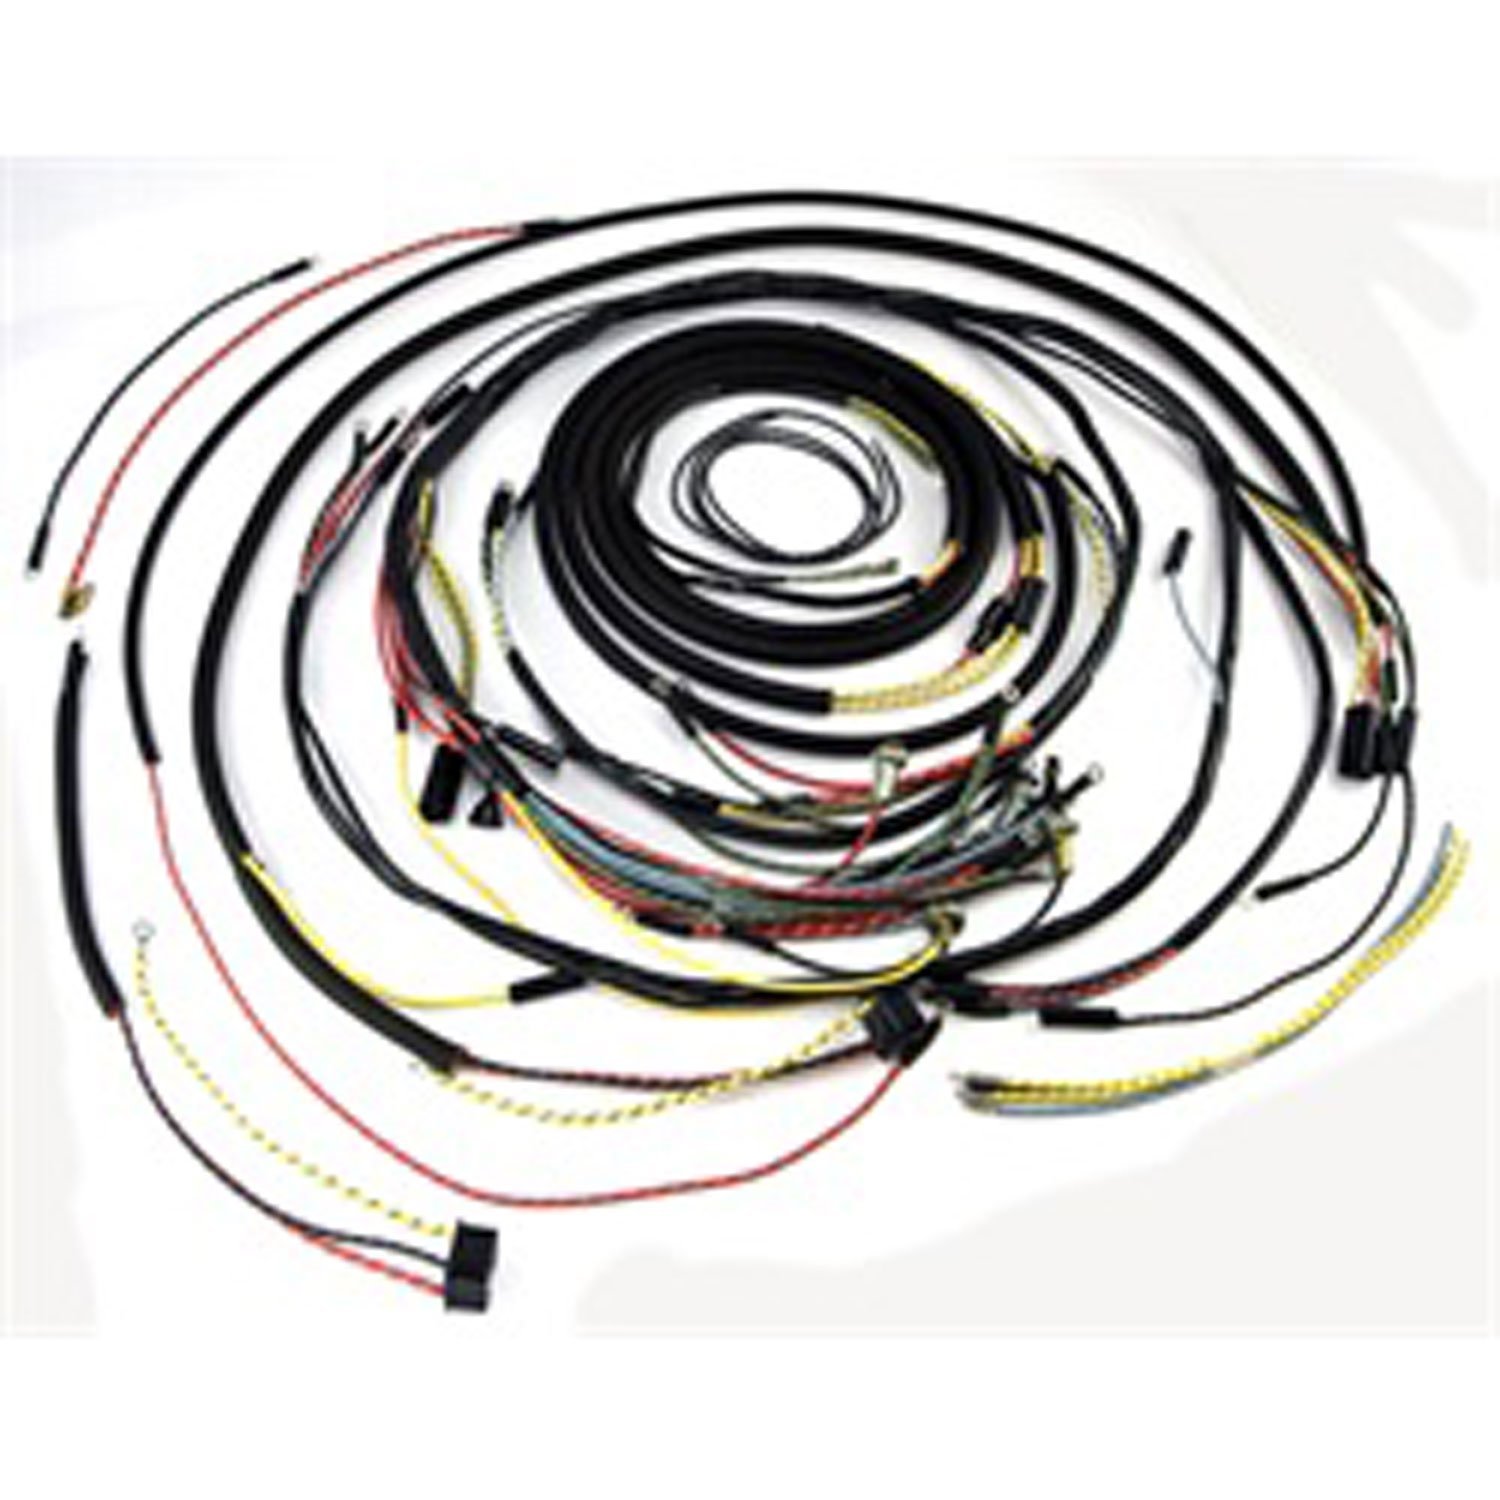 Complete Wiring Harness With Cloth Wire Cover 1955-1956 CJ5